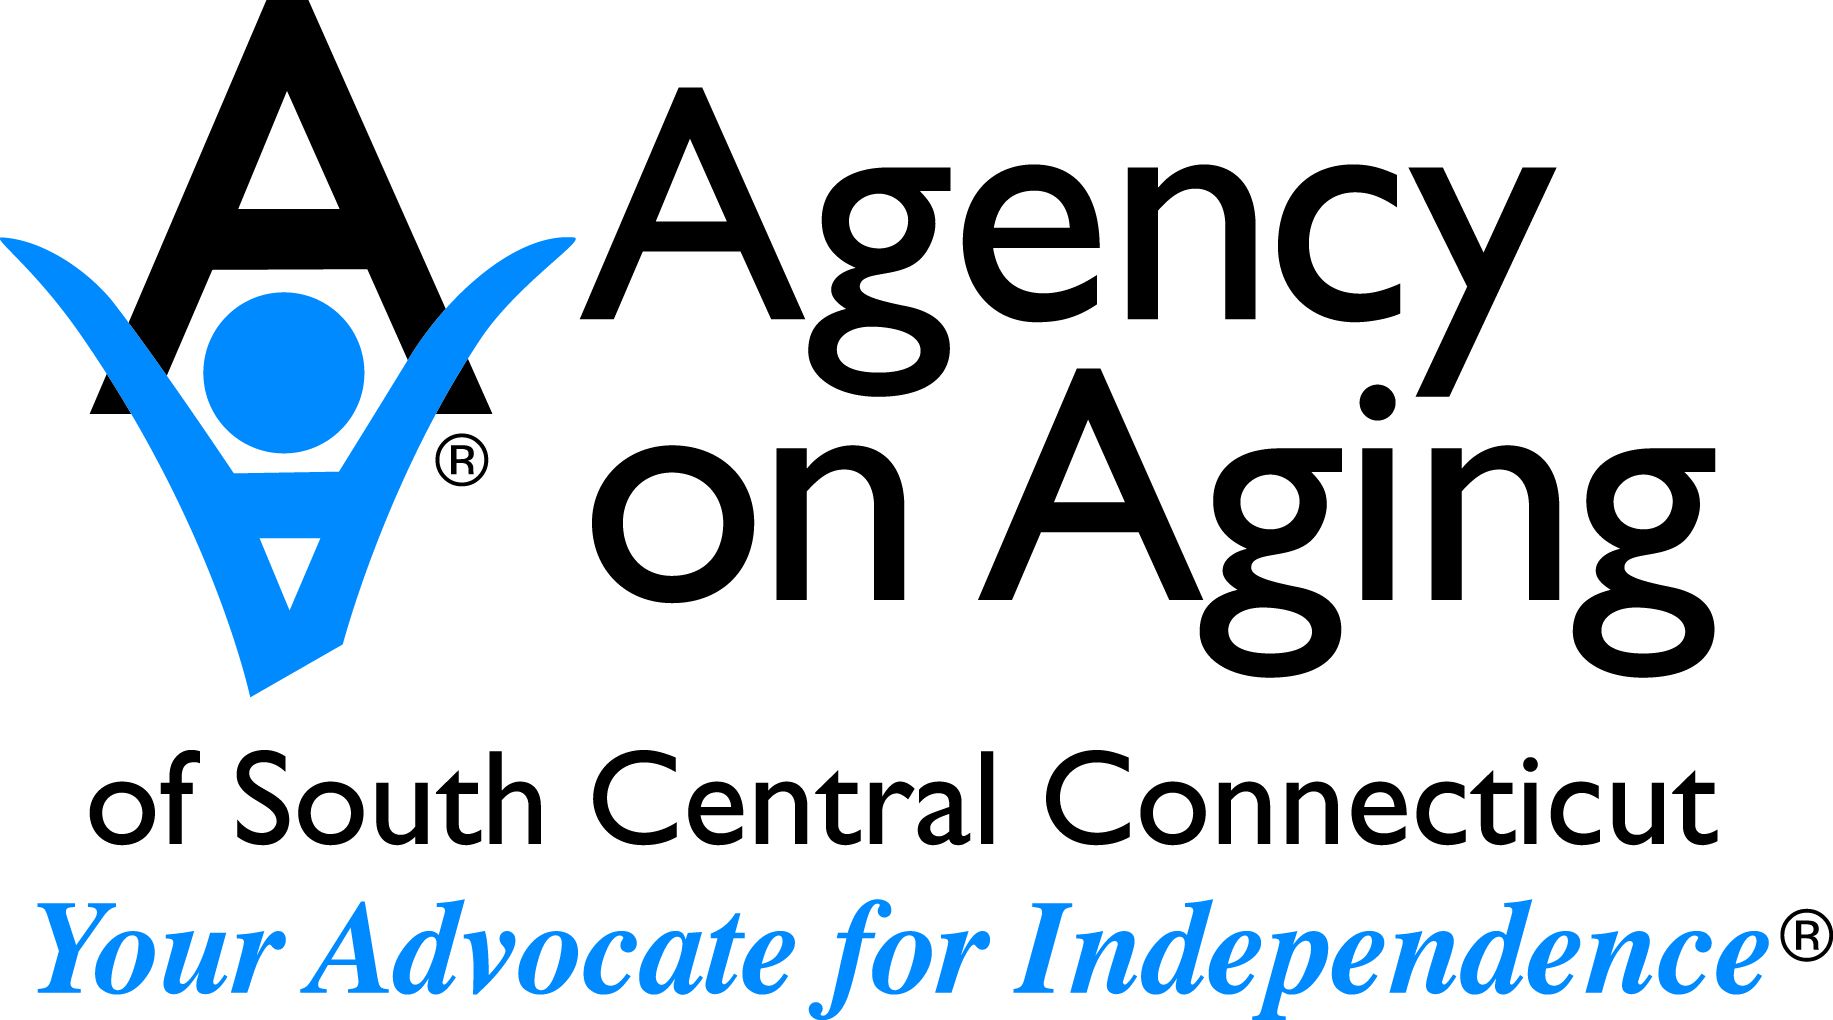 Agency on Aging of South Central Connecticut Logo